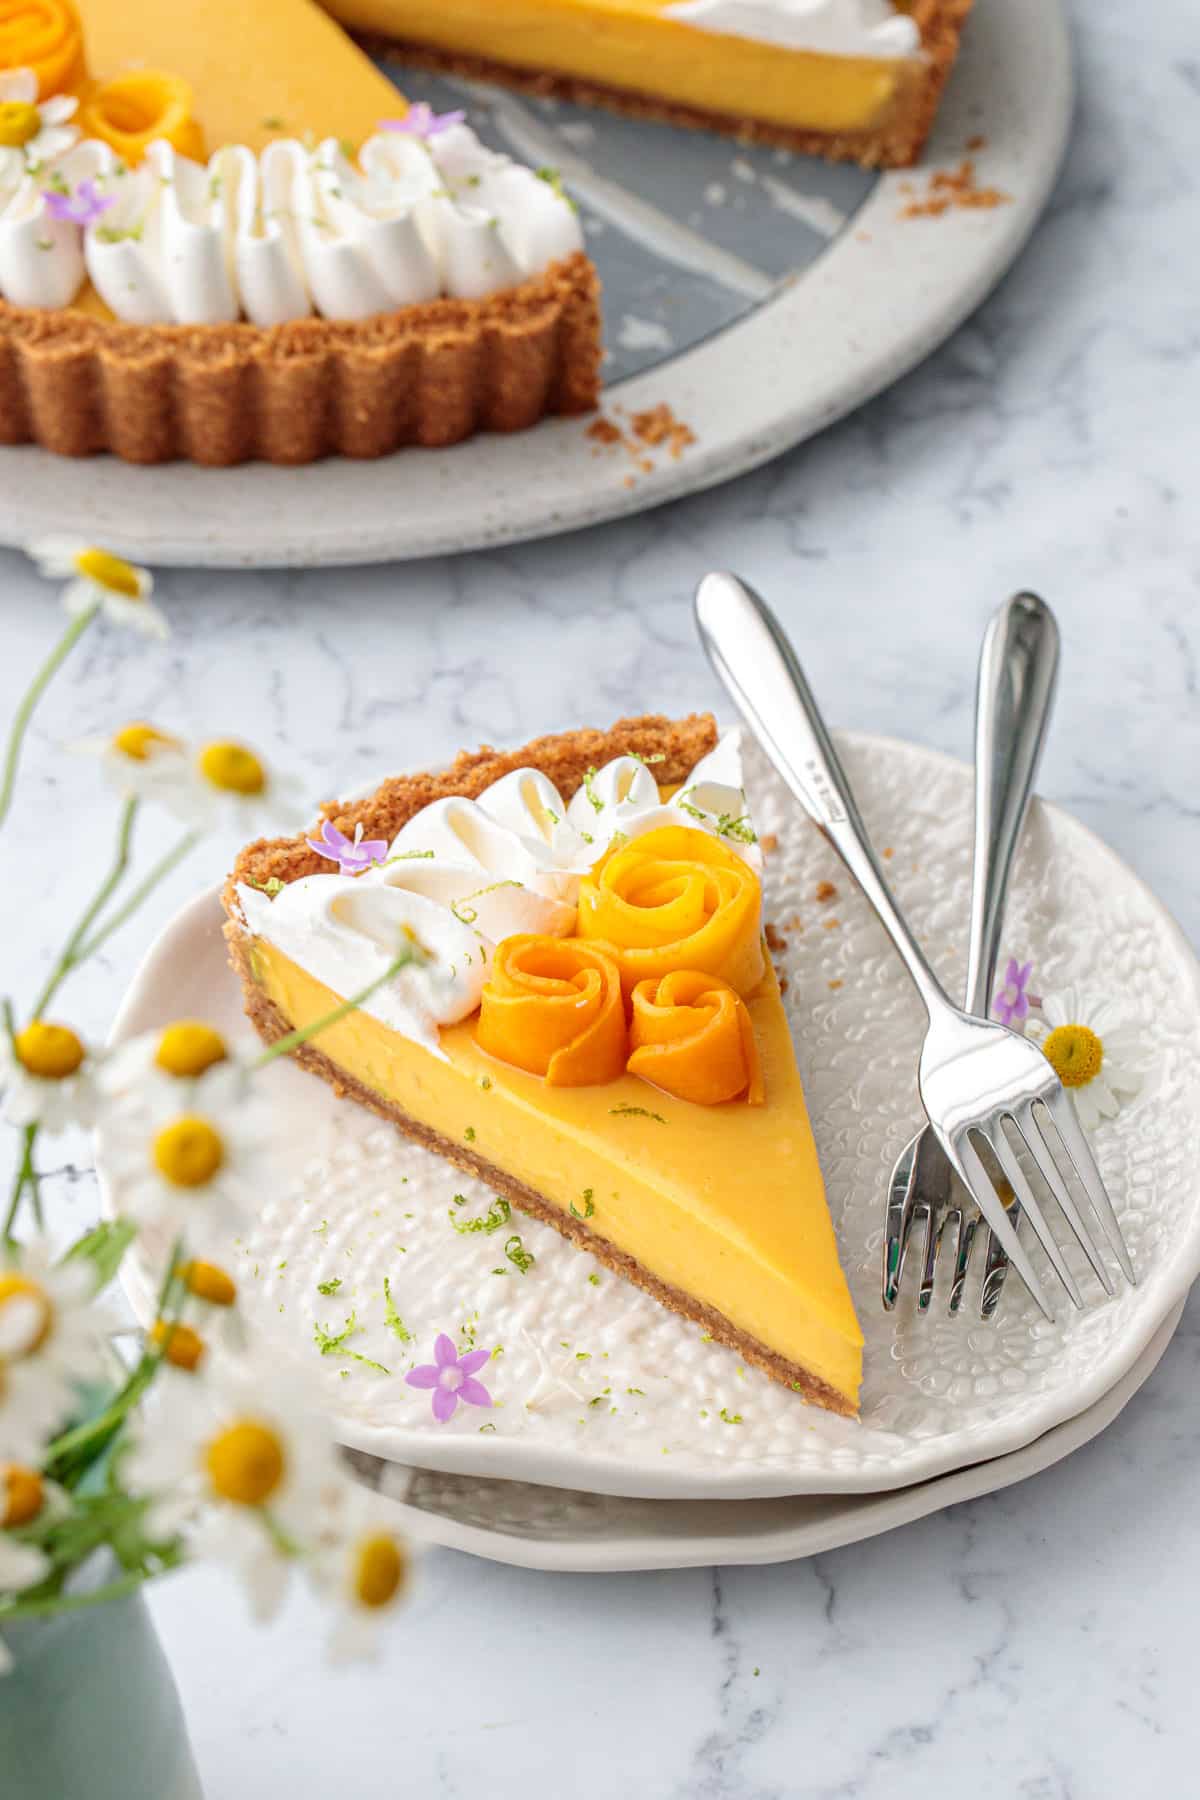 Slice of Mango Lime Tart on a plate, chamomile flowers out of focus in the foreground.